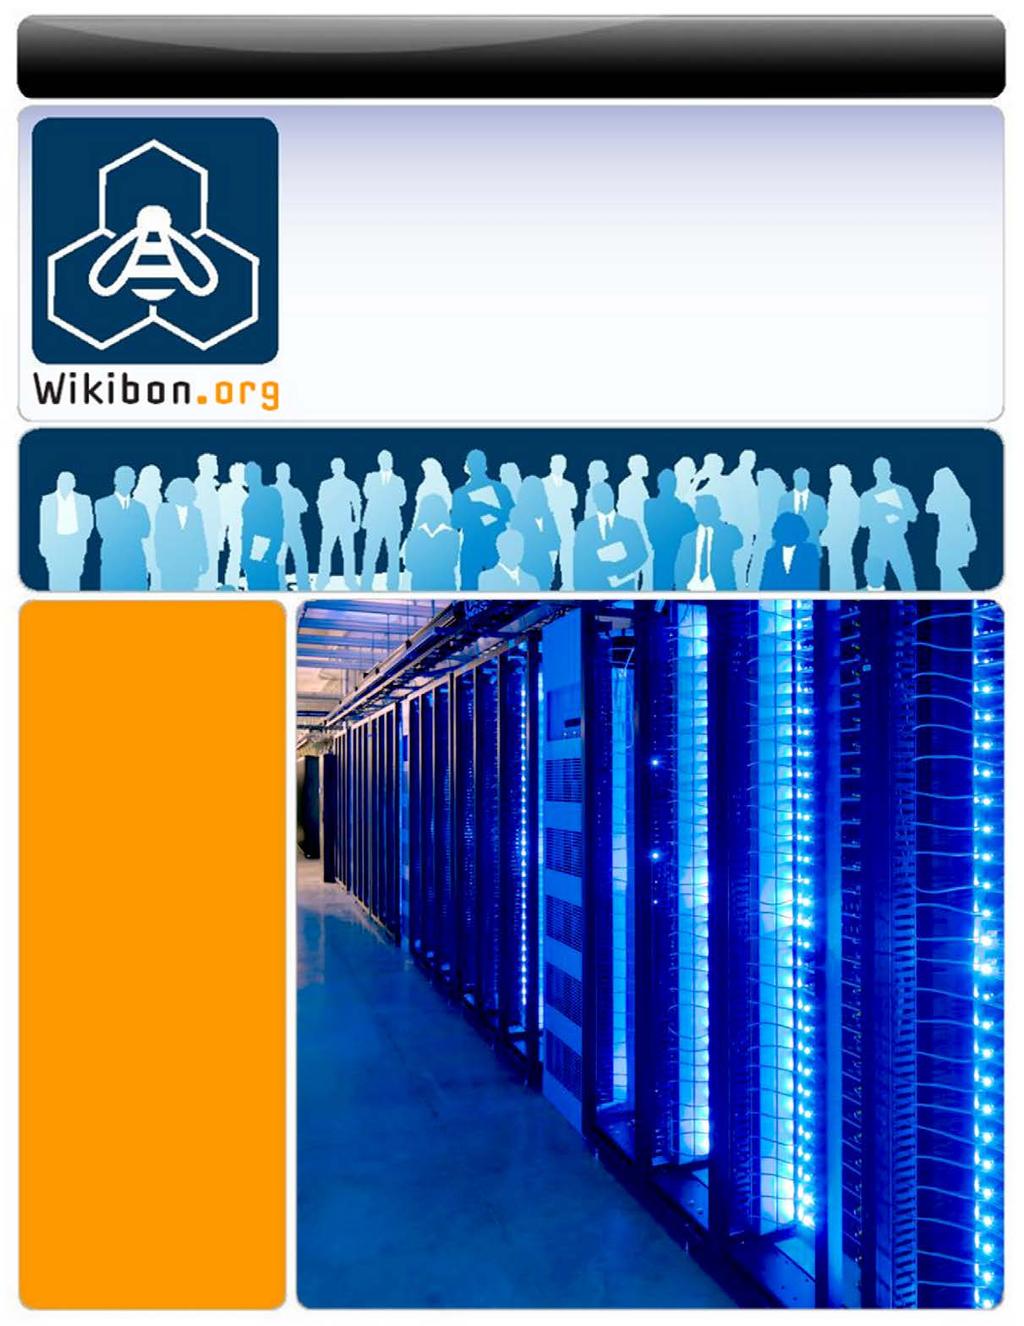 Analysis from The Wikibon Project September 2014 The Value of